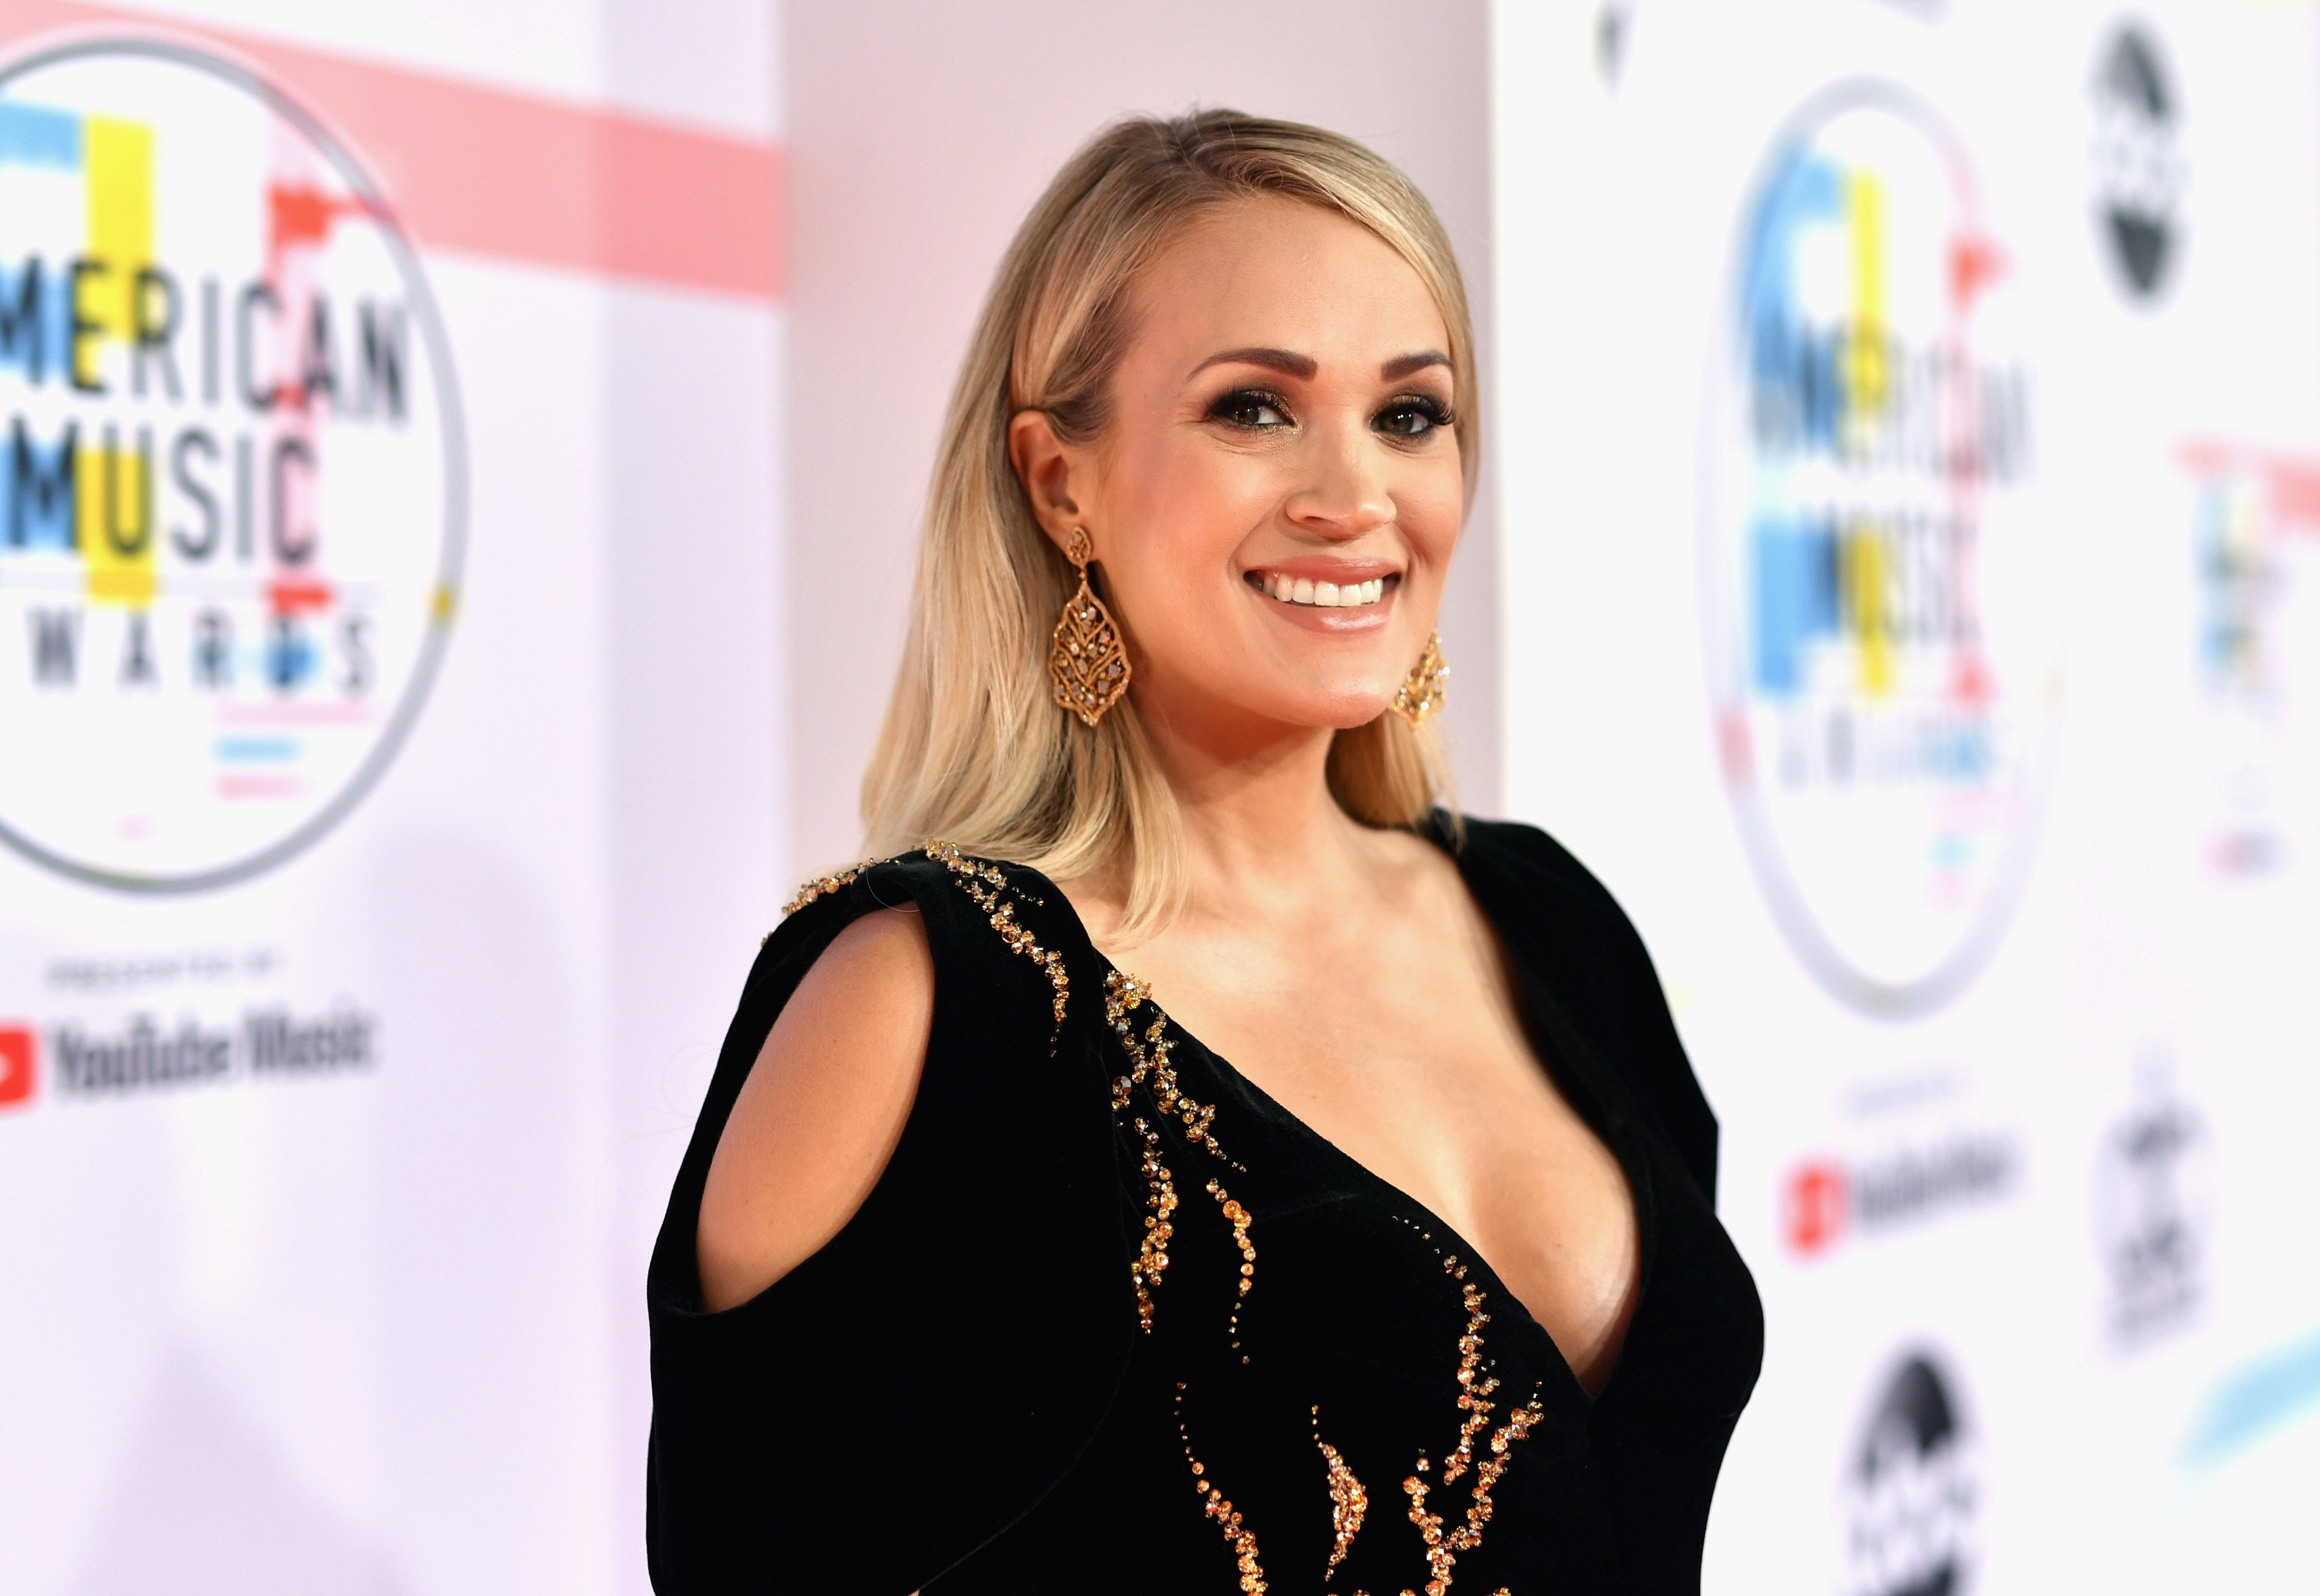 Carrie Underwood at the 2018 American Music Awards | Photo: Getty Images